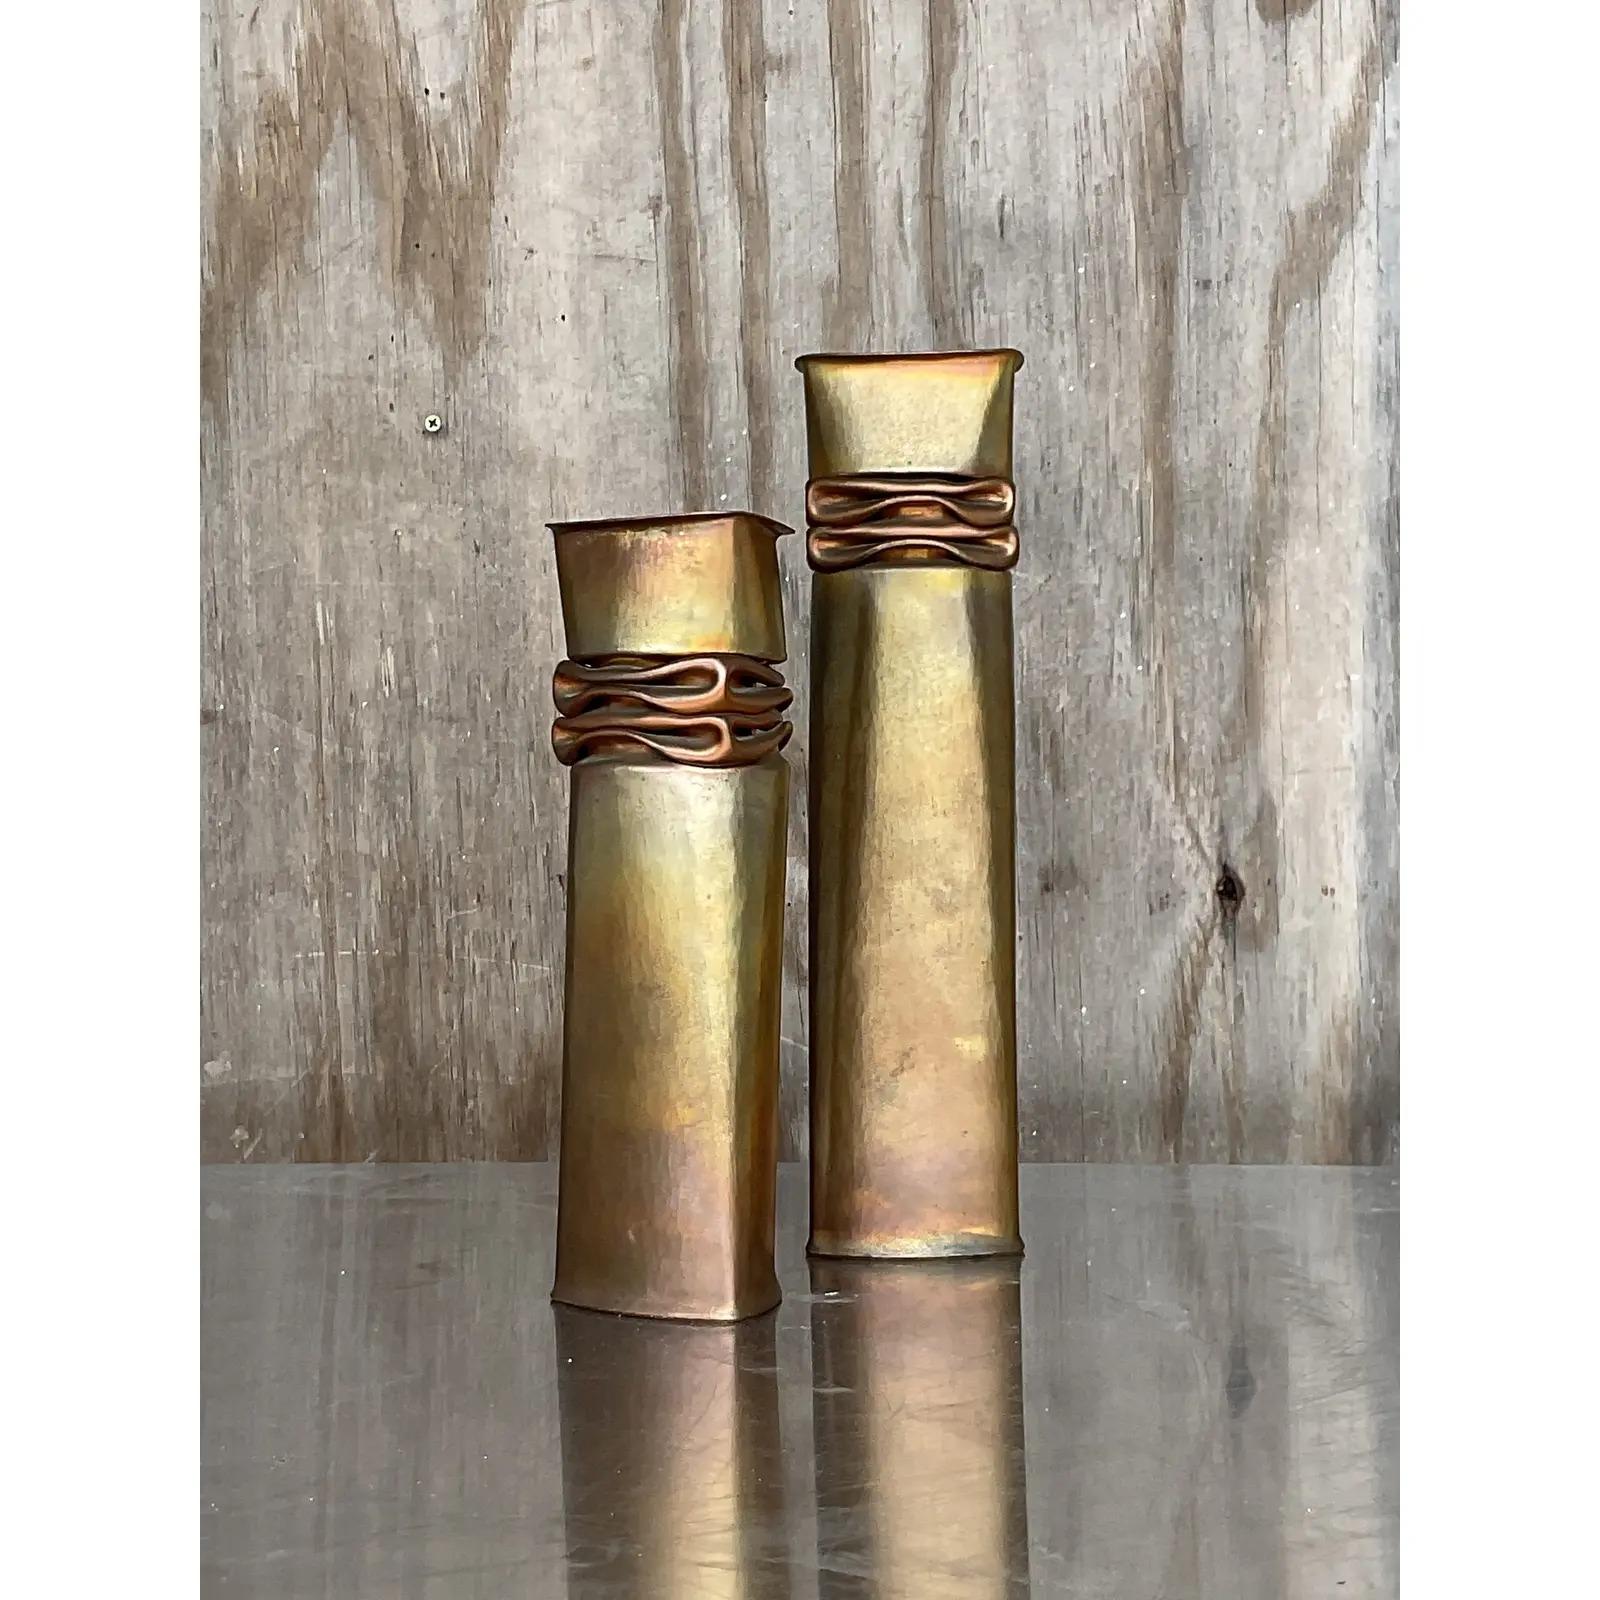 Vintage Modernist Thomas Roy Markusen Nickeled Copper Vases - Set of 2 In Good Condition For Sale In west palm beach, FL